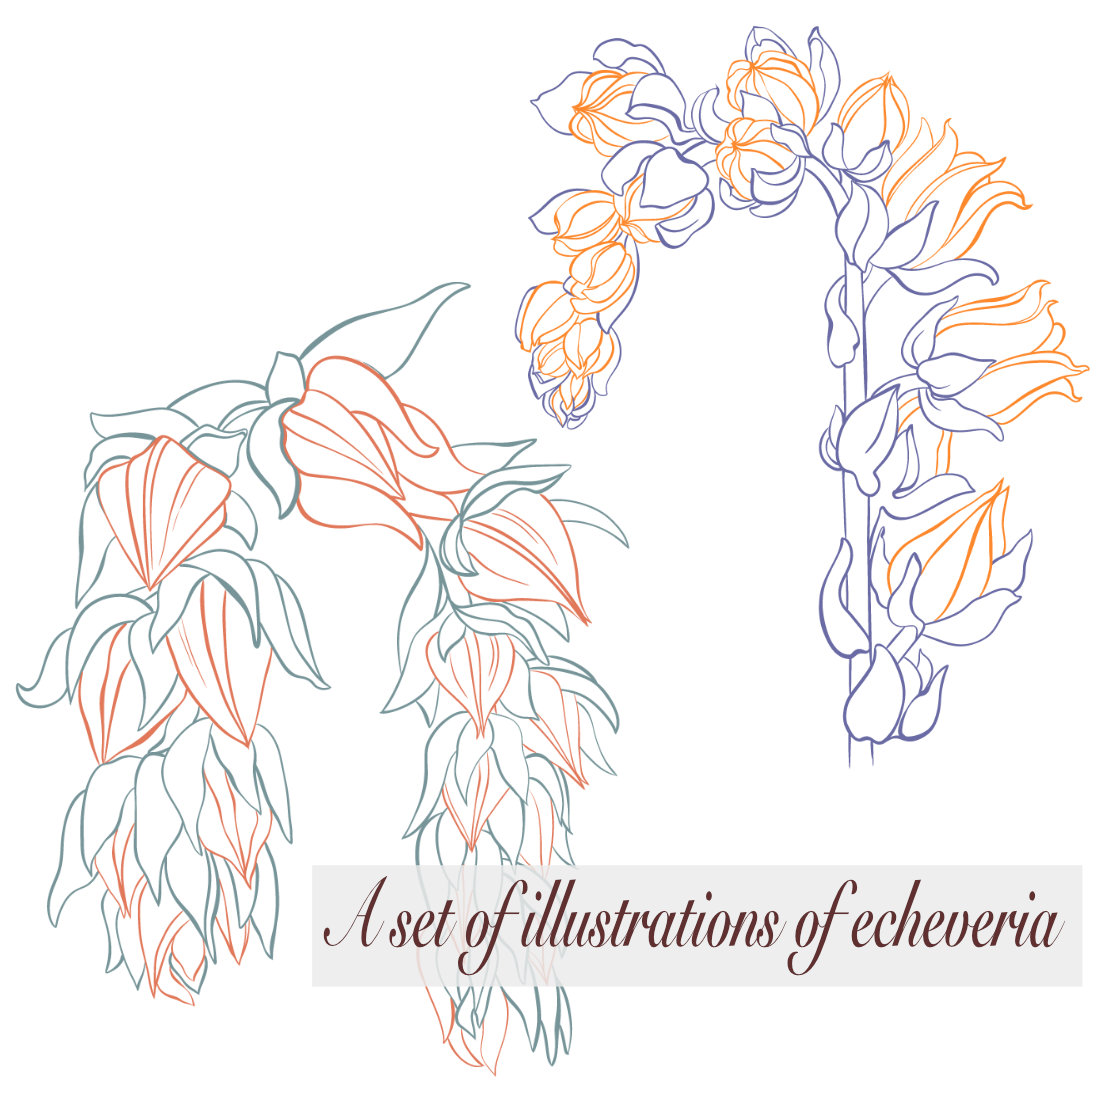 A set of illustrations of echeveria preview image.